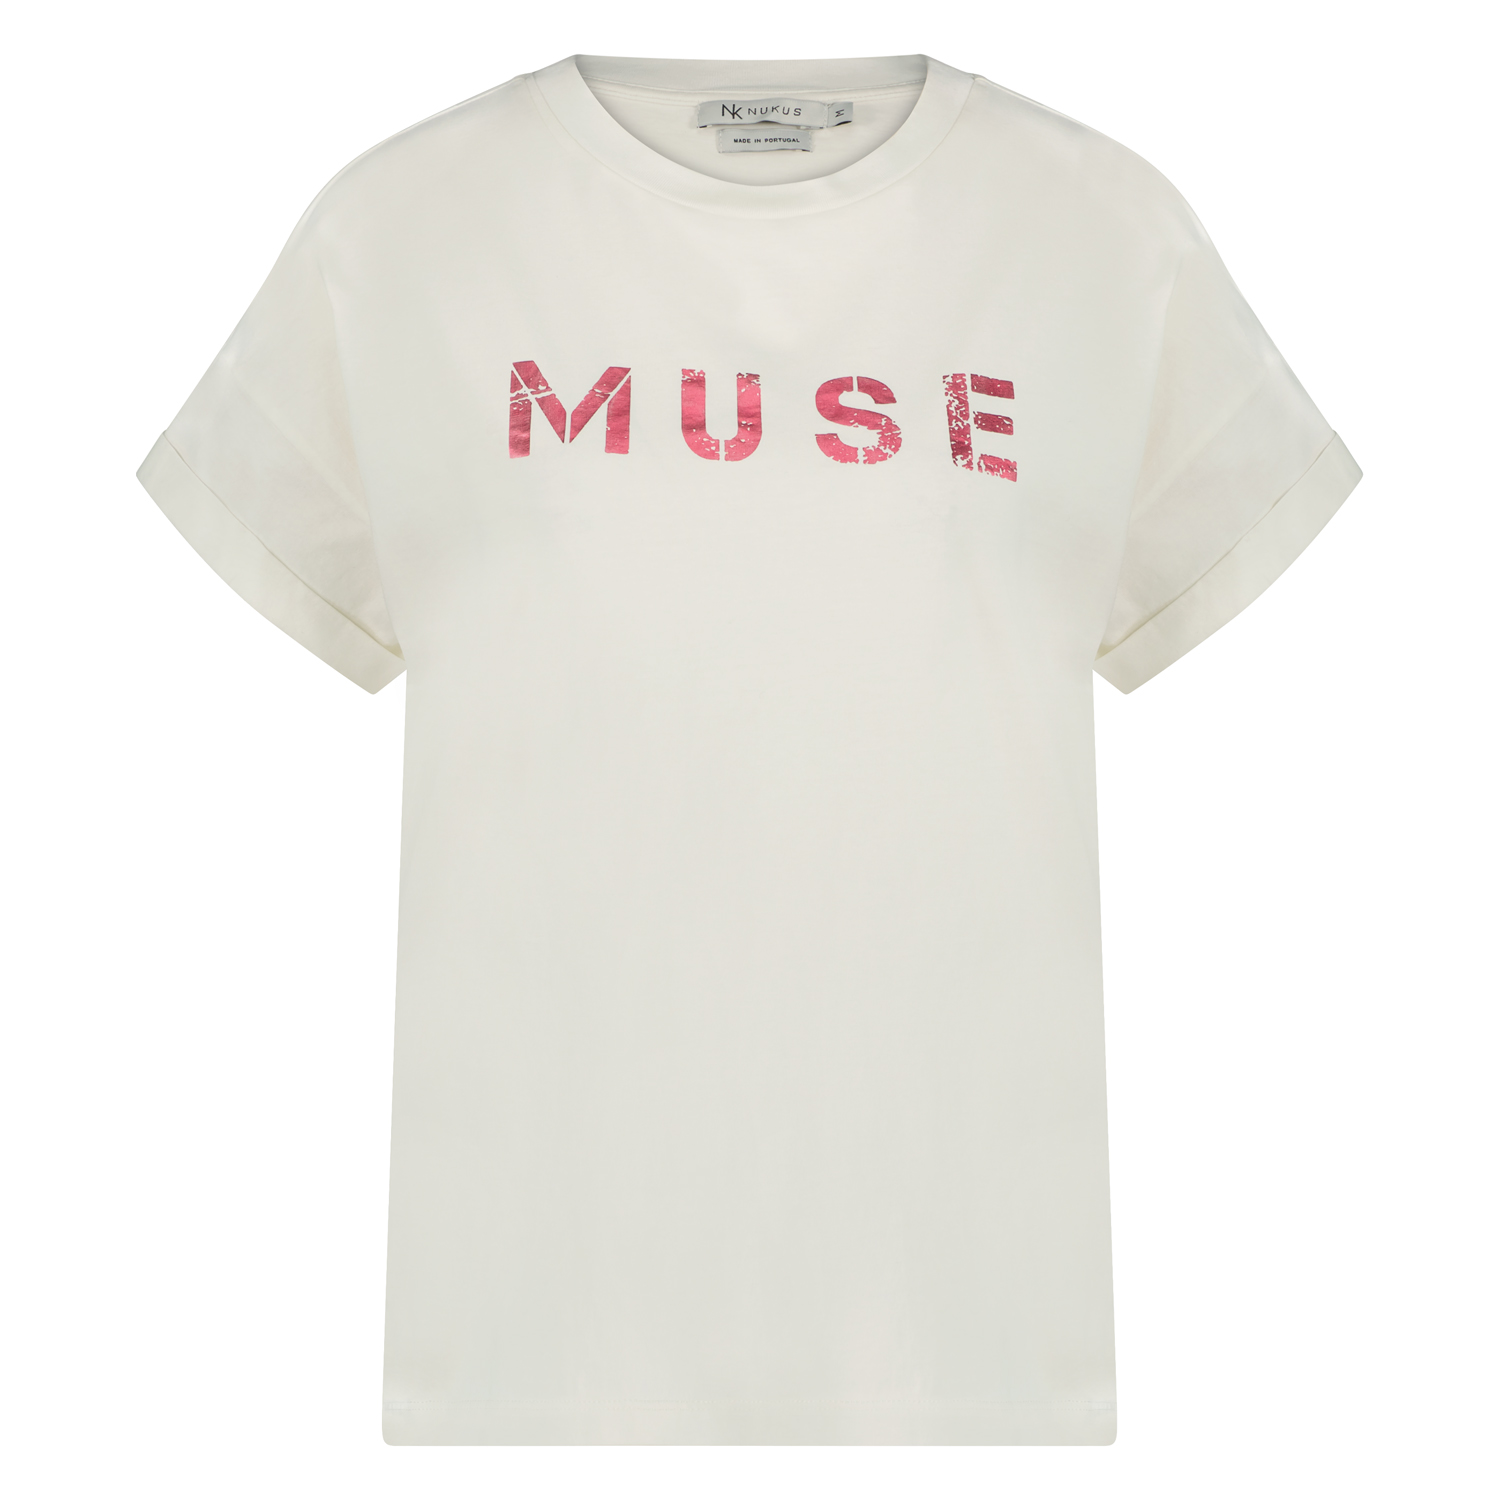 muse_off white_front